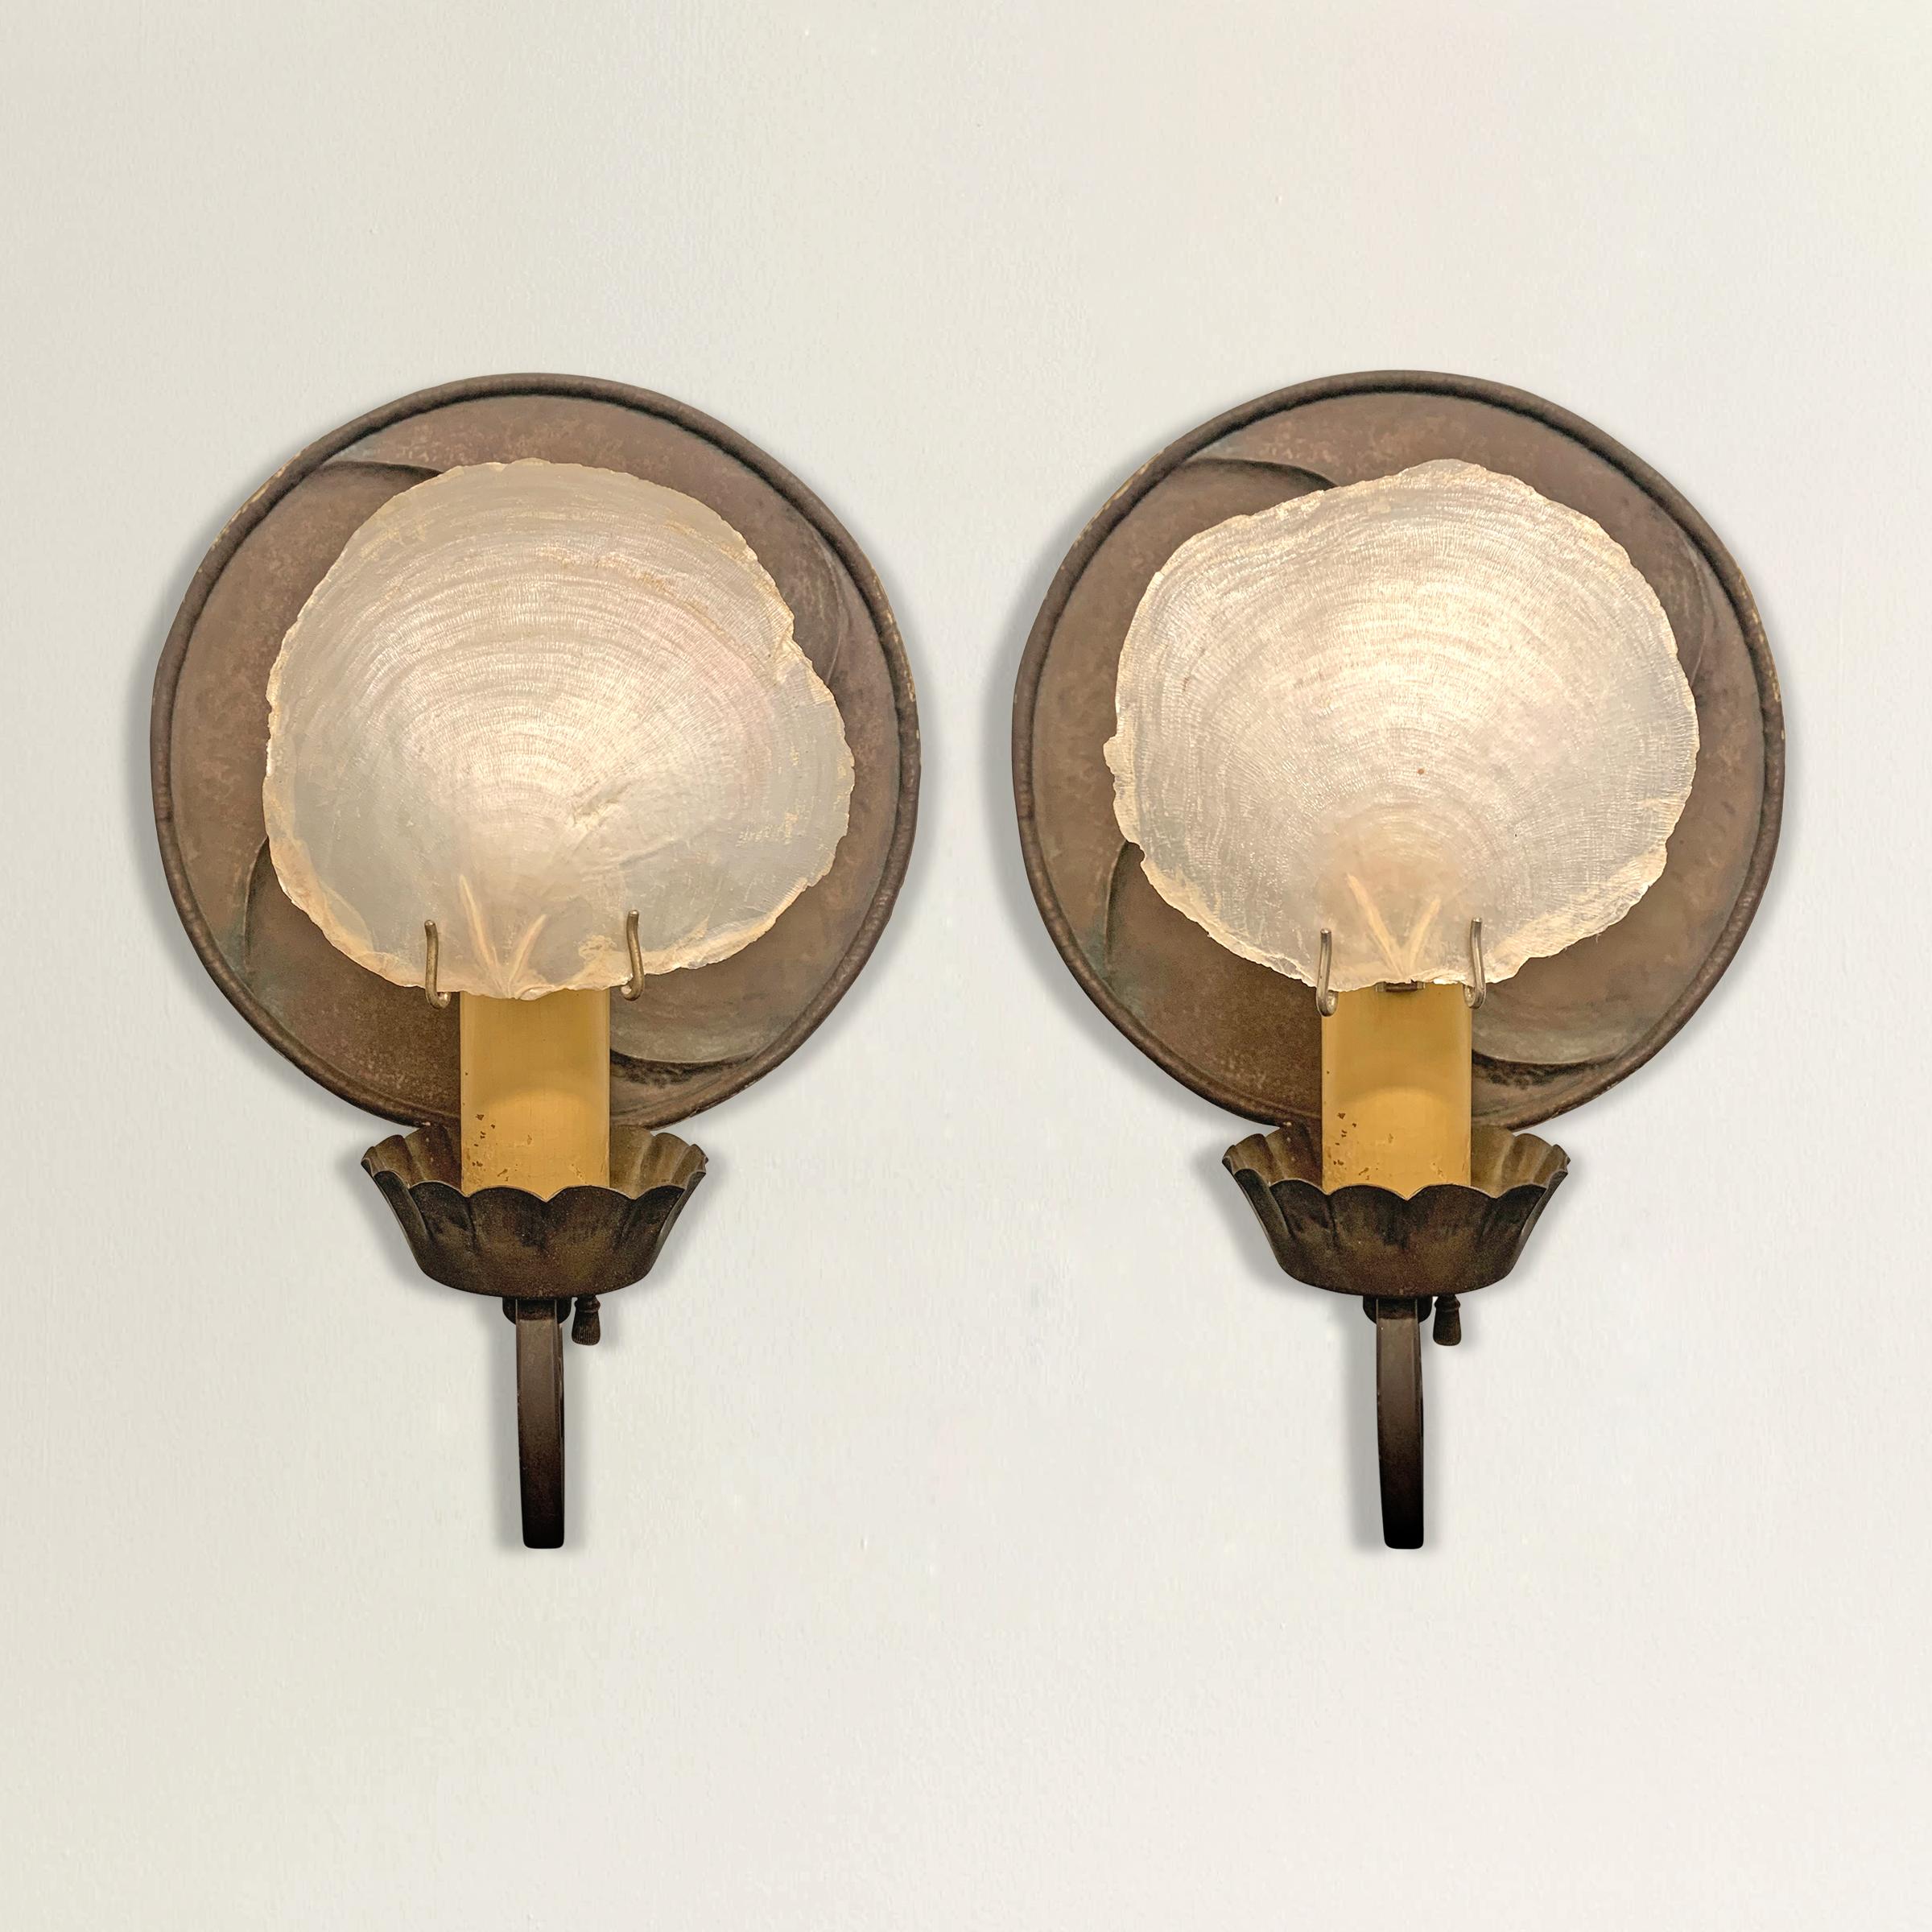 A pair of incredible sconces designed by east coast architect, Frank Forster, each with a hand-hammered circular steel backplate, a single arm with a scalloped candle cup, and a capiz shell shade. The capiz shell shades are probably not original,